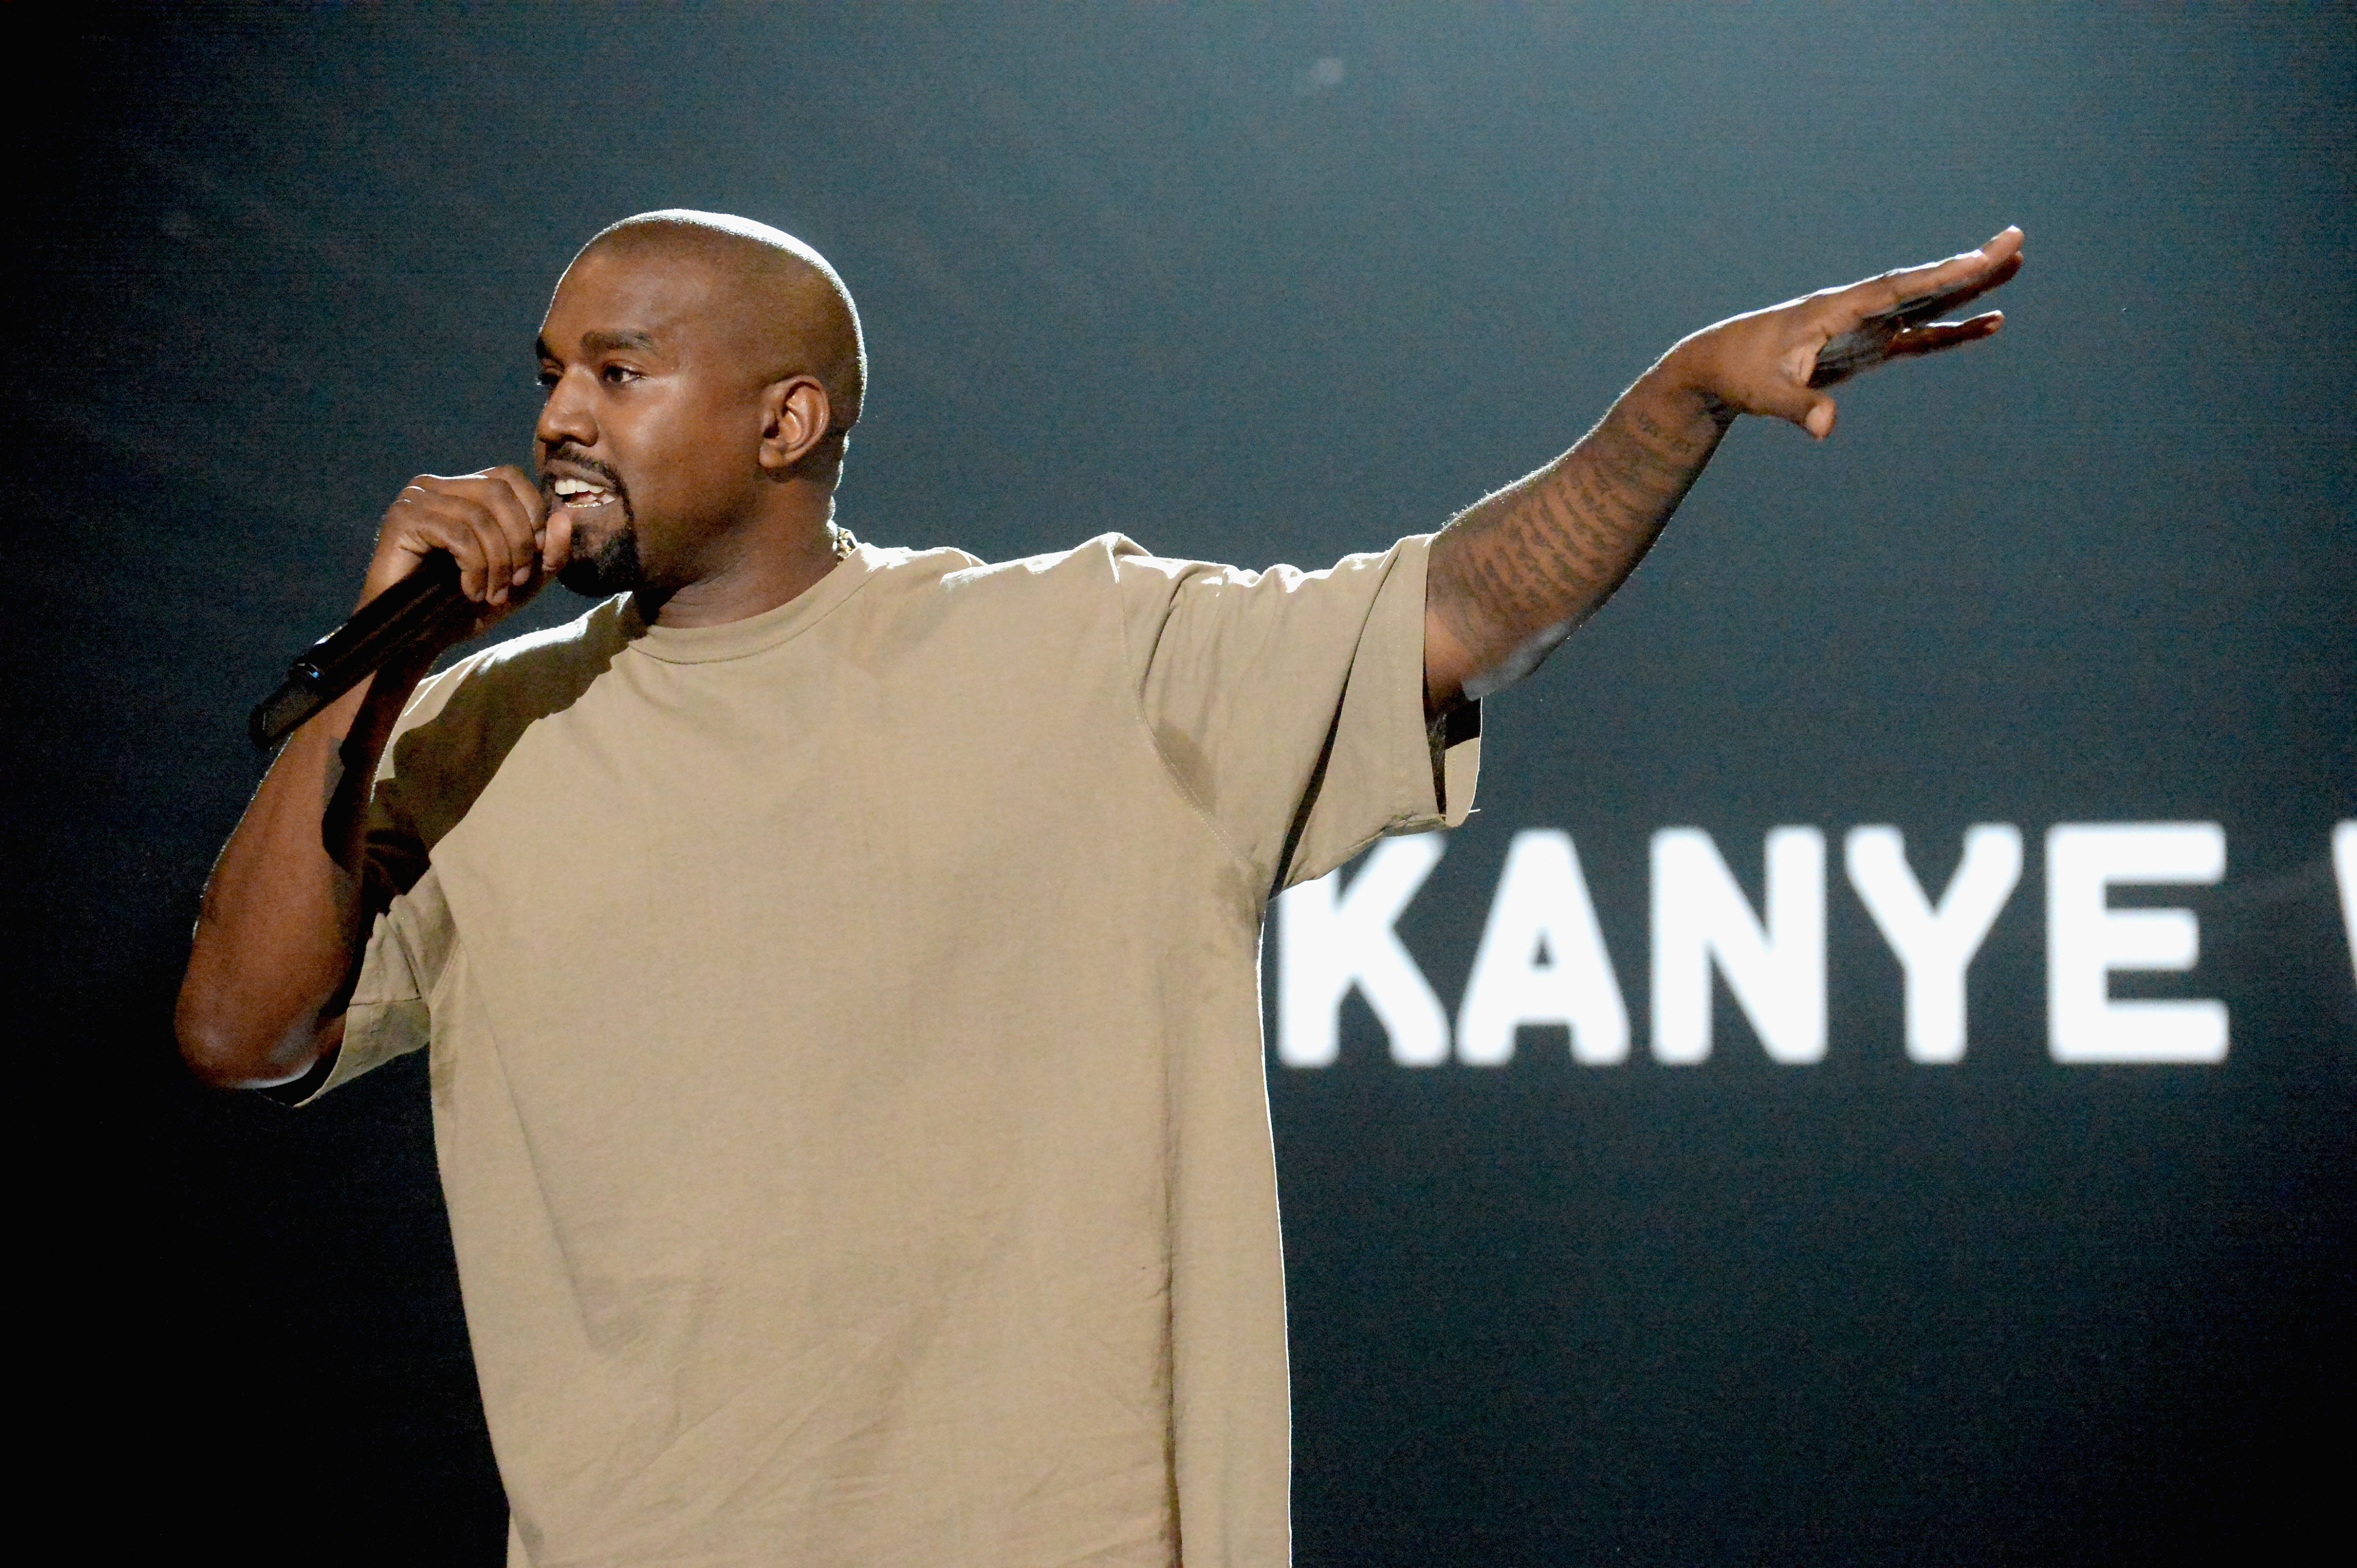 Kanye West speaks onstage during the 2015 MTV Video Music Awards at Microsoft Theater in Los Angeles on Aug. 30, 2015. (Jeff Kravitz—FilmMagic/Getty Images)